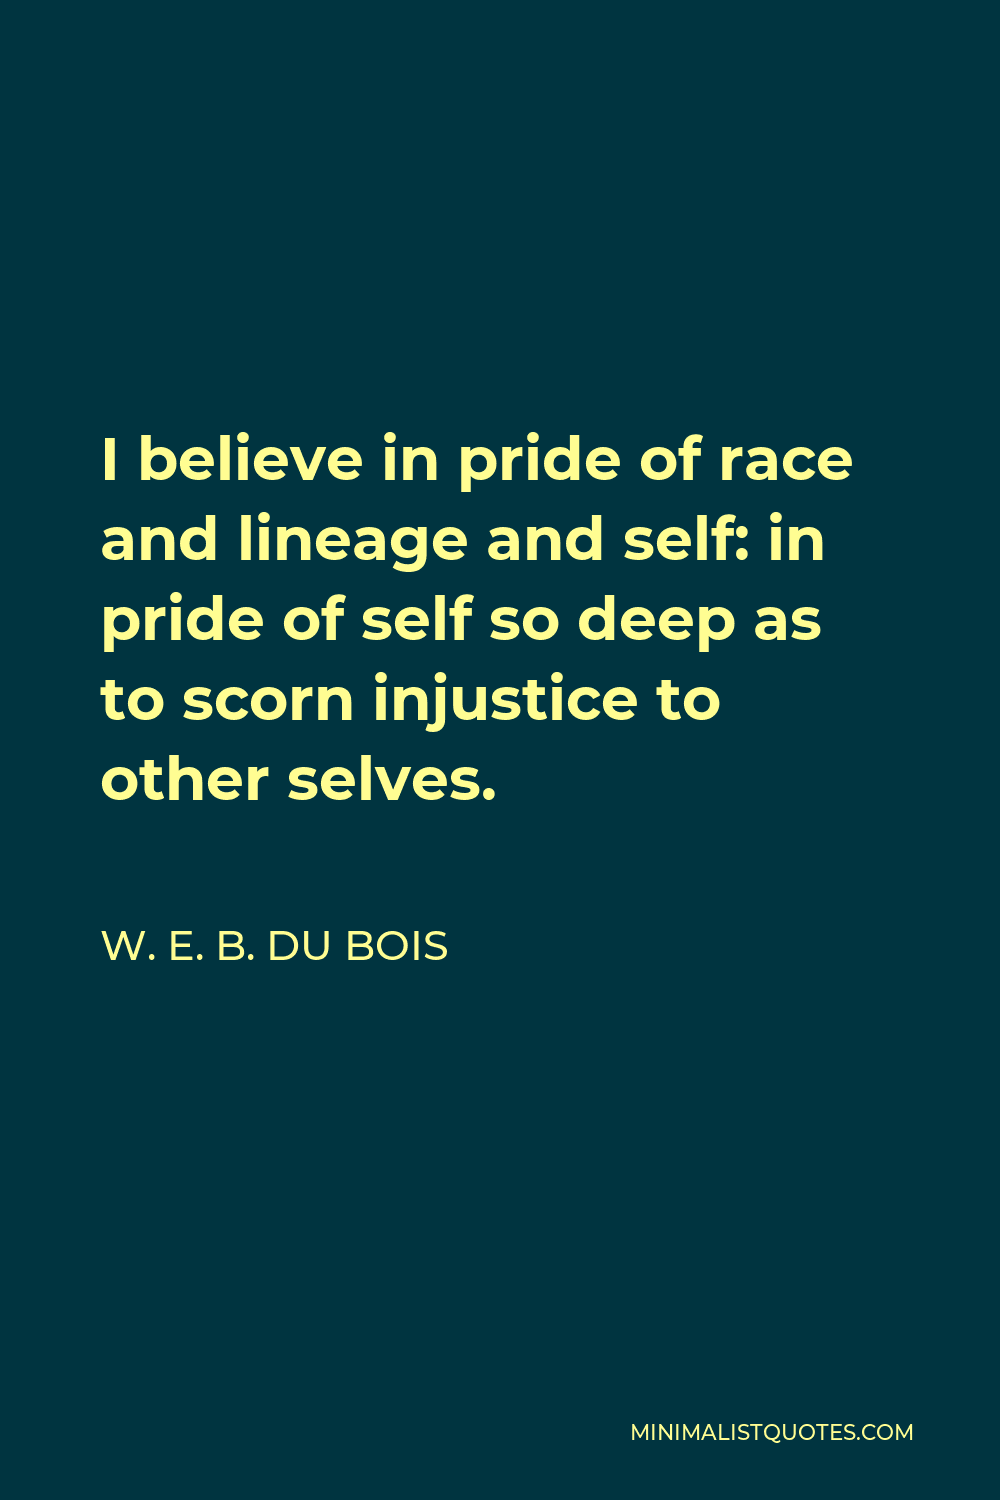 W. E. B. Du Bois Quote - I believe in pride of race and lineage and self: in pride of self so deep as to scorn injustice to other selves.